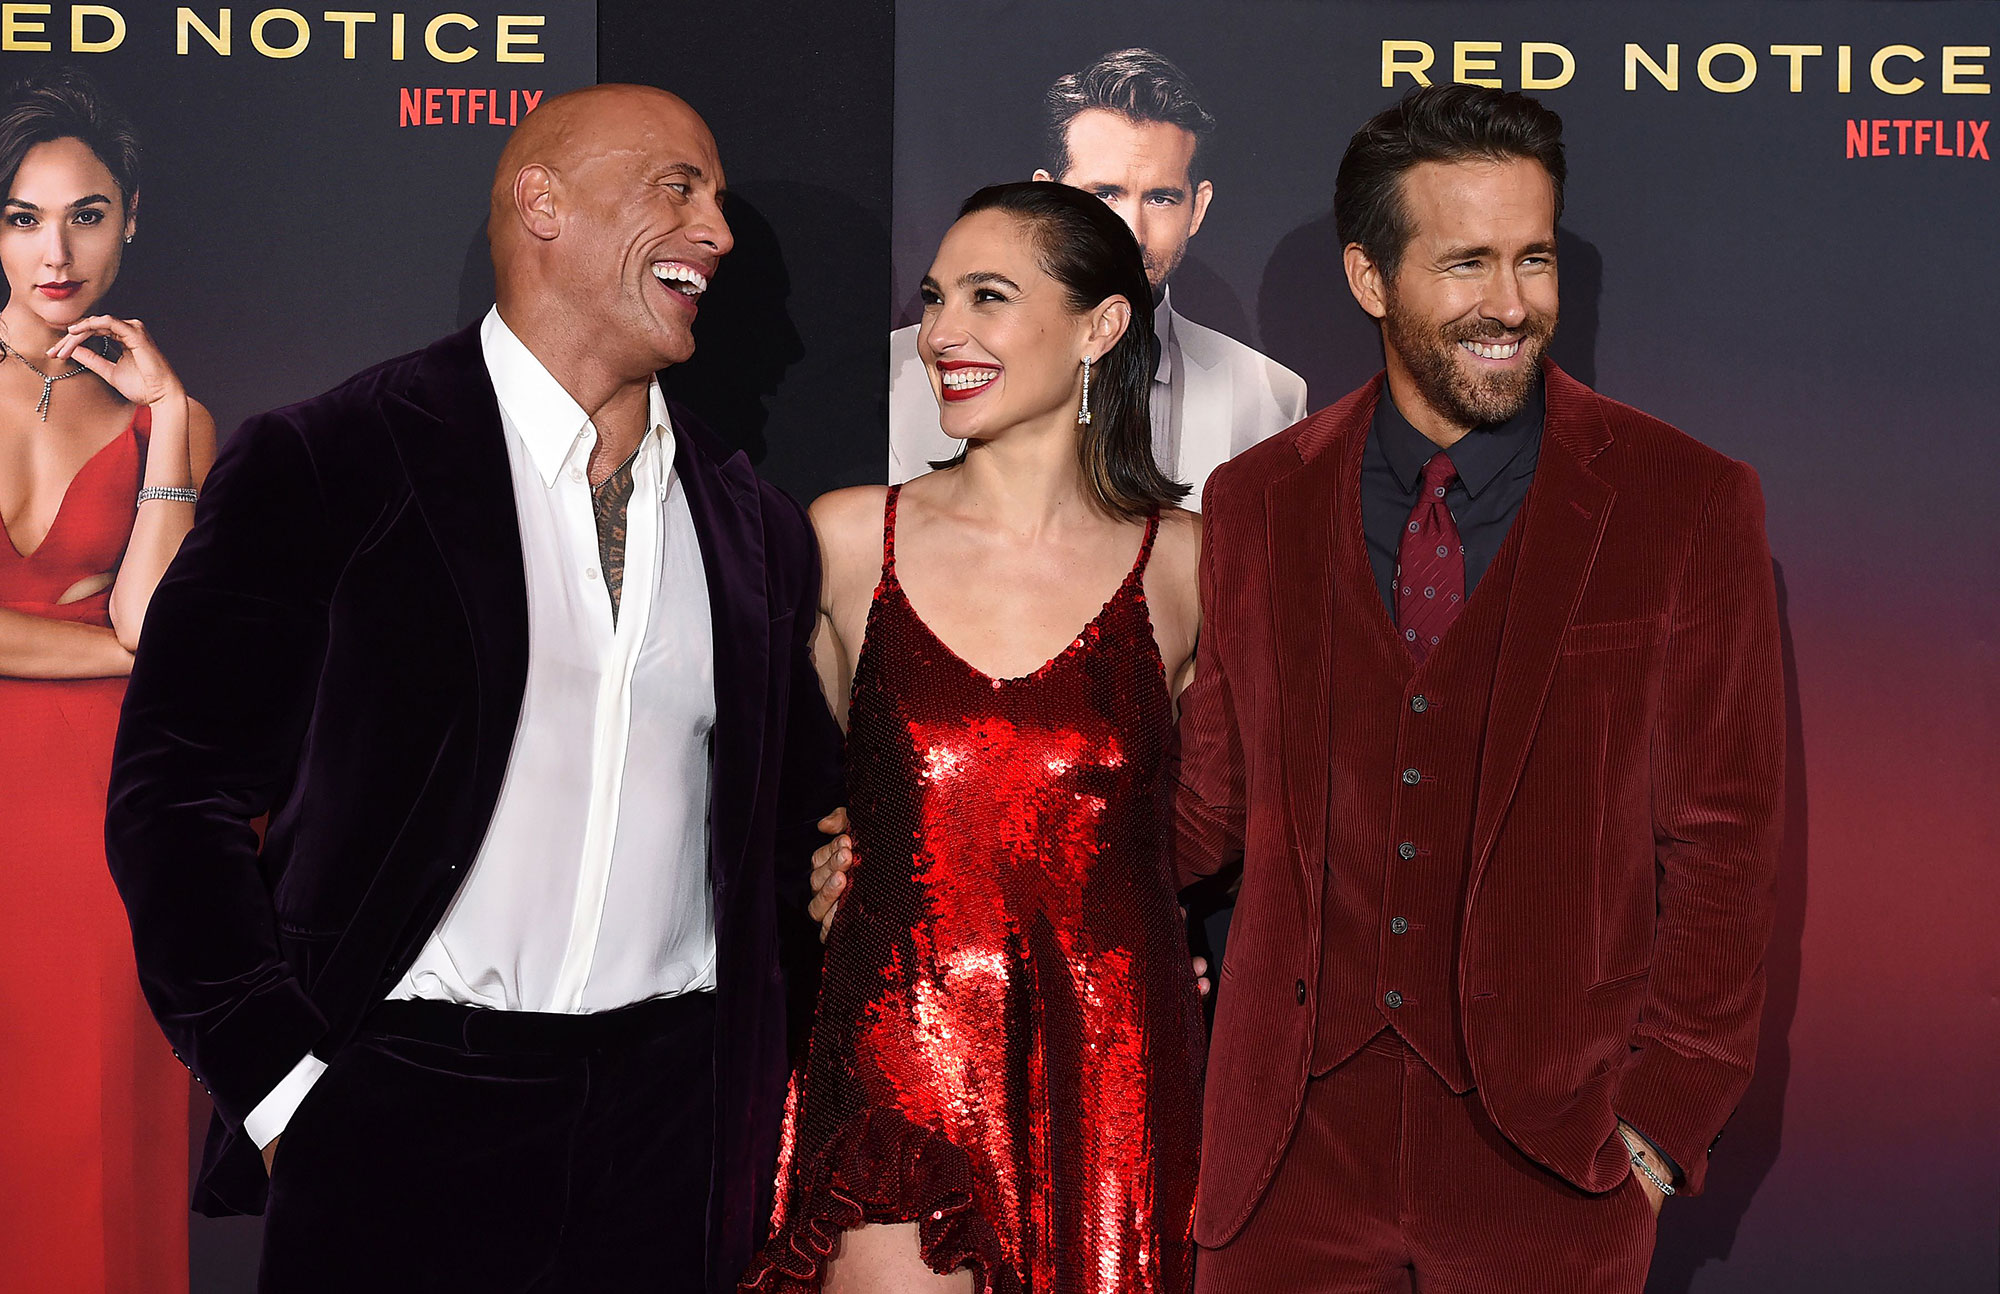 https://www.usmagazine.com/wp-content/uploads/2021/11/Color-Coordinated-Costars-Gal-Gadot-Ryan-Reynolds-and-Dwayne-The-Rock-Johnson-Match-at-Red-Notice-Premiere-2.jpg?quality=82&strip=all